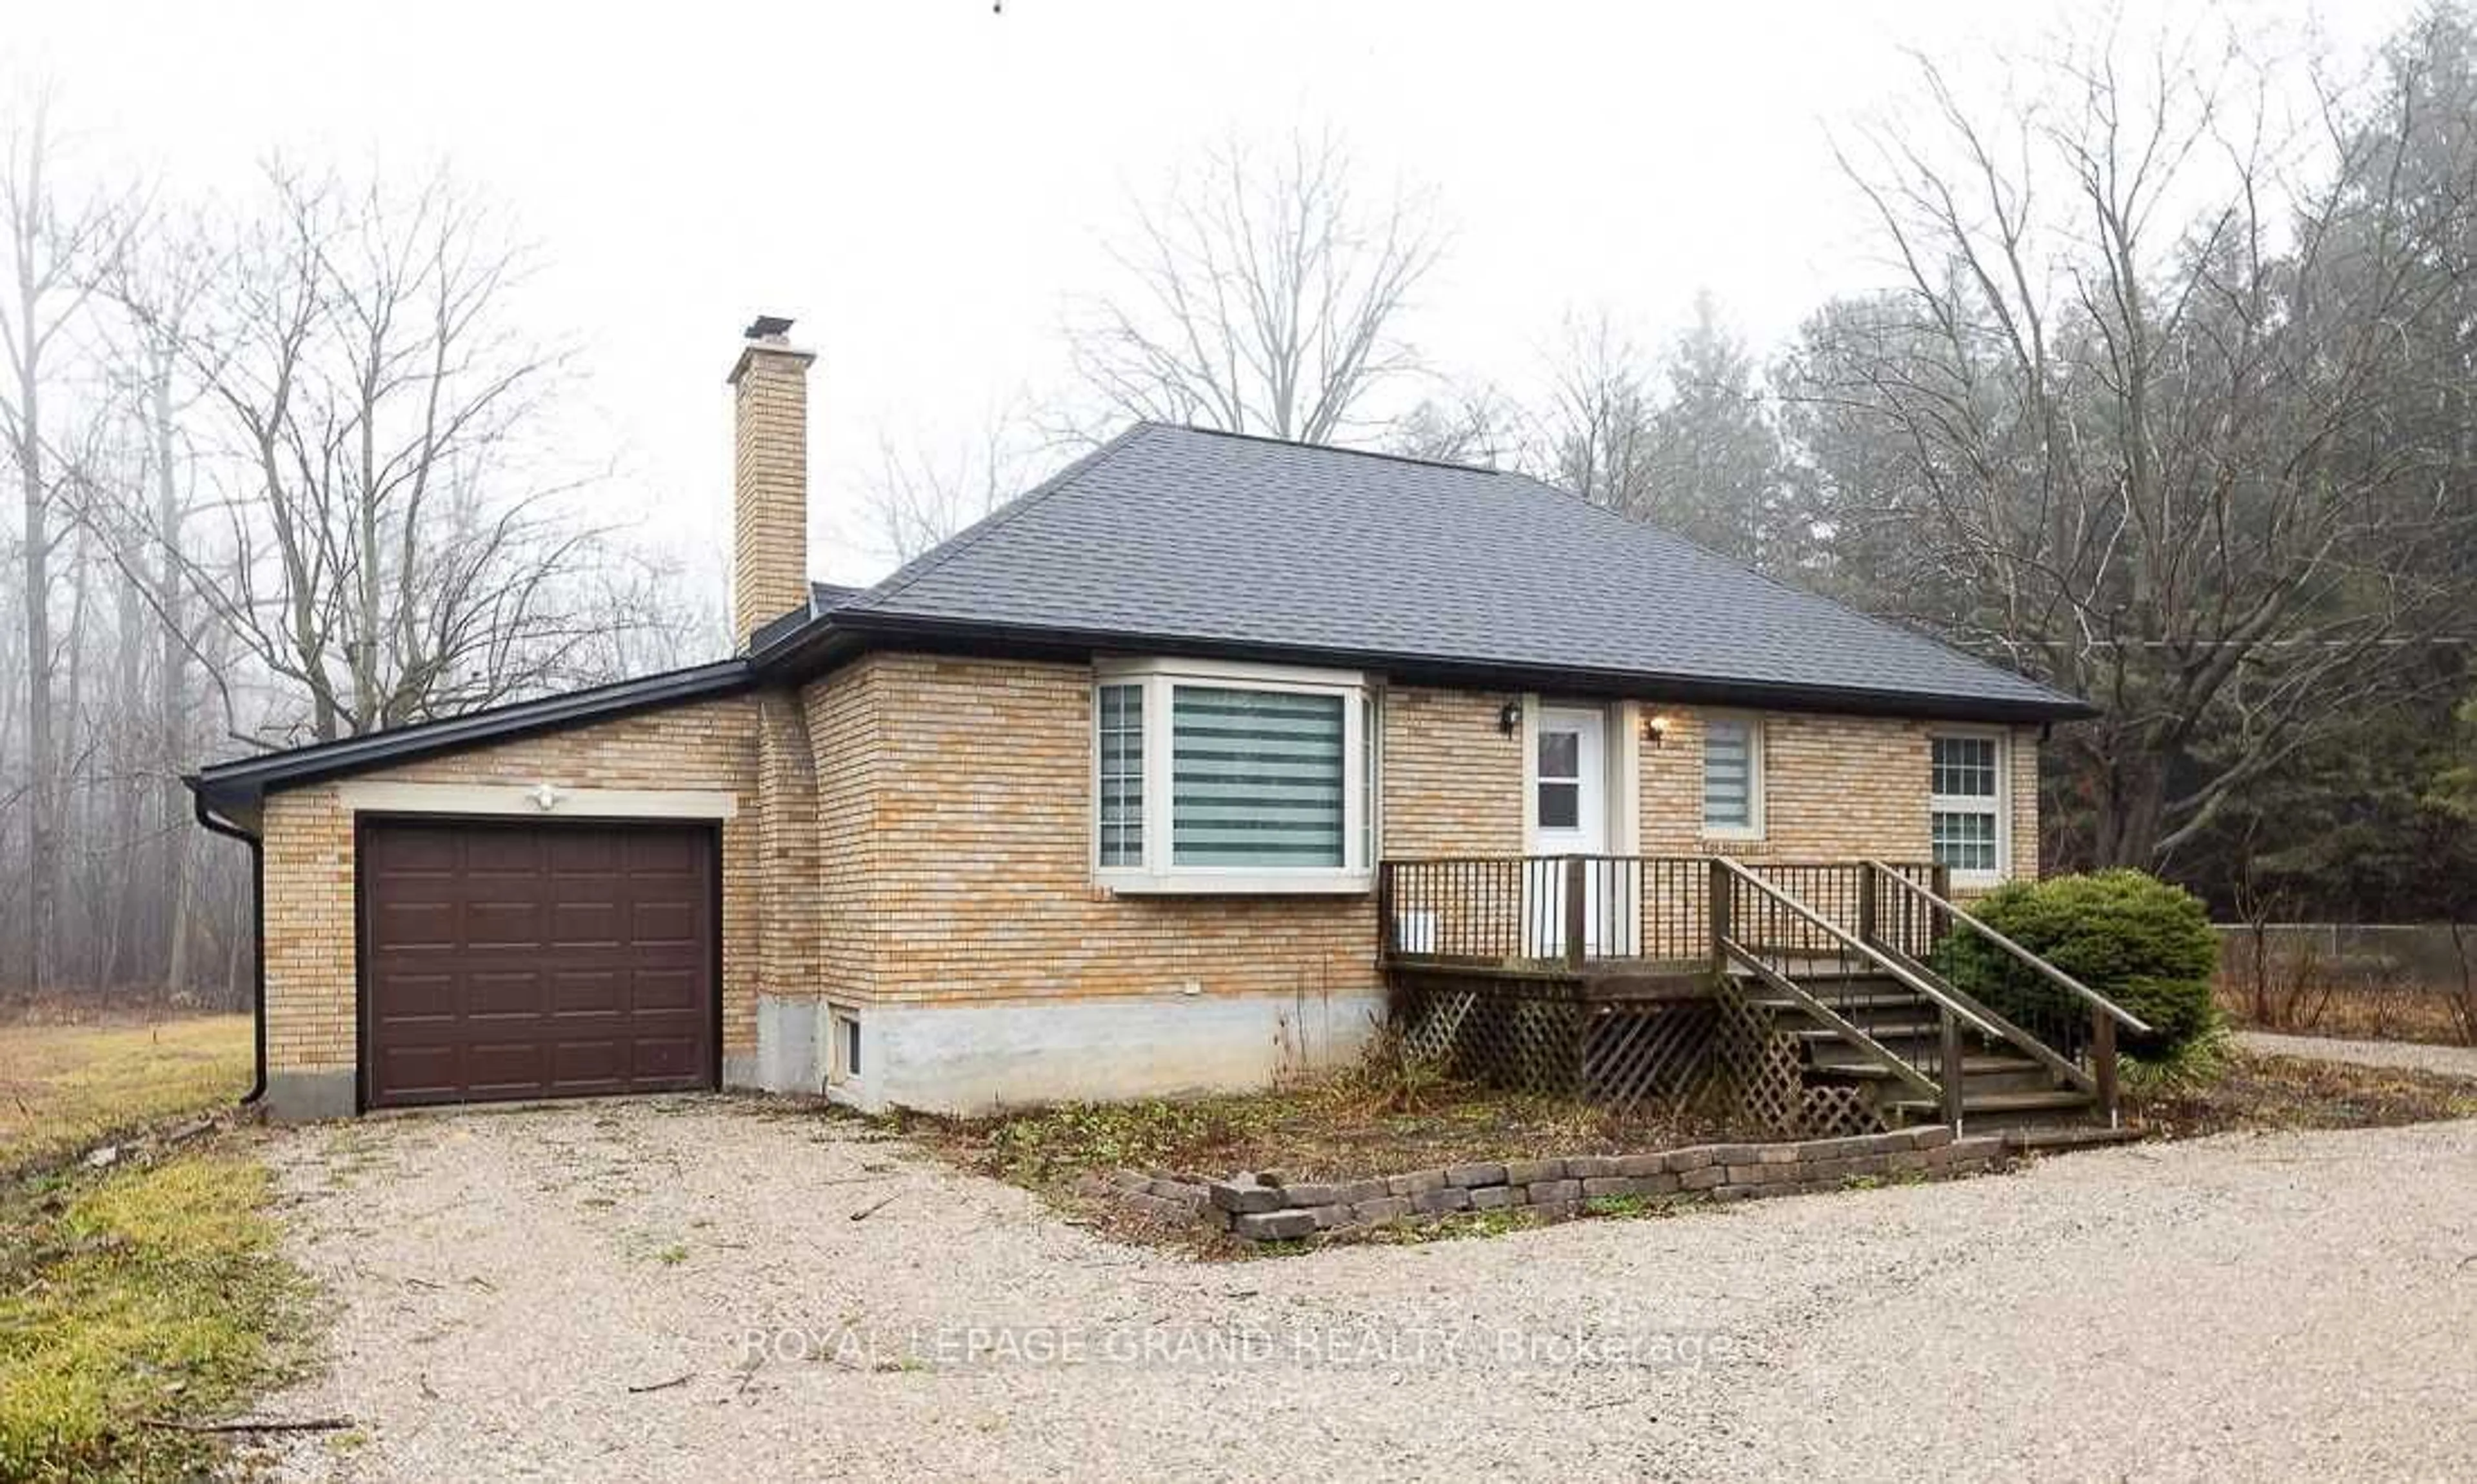 Cottage for 9630 Sunset Dr, St. Thomas Ontario N5P 3T2